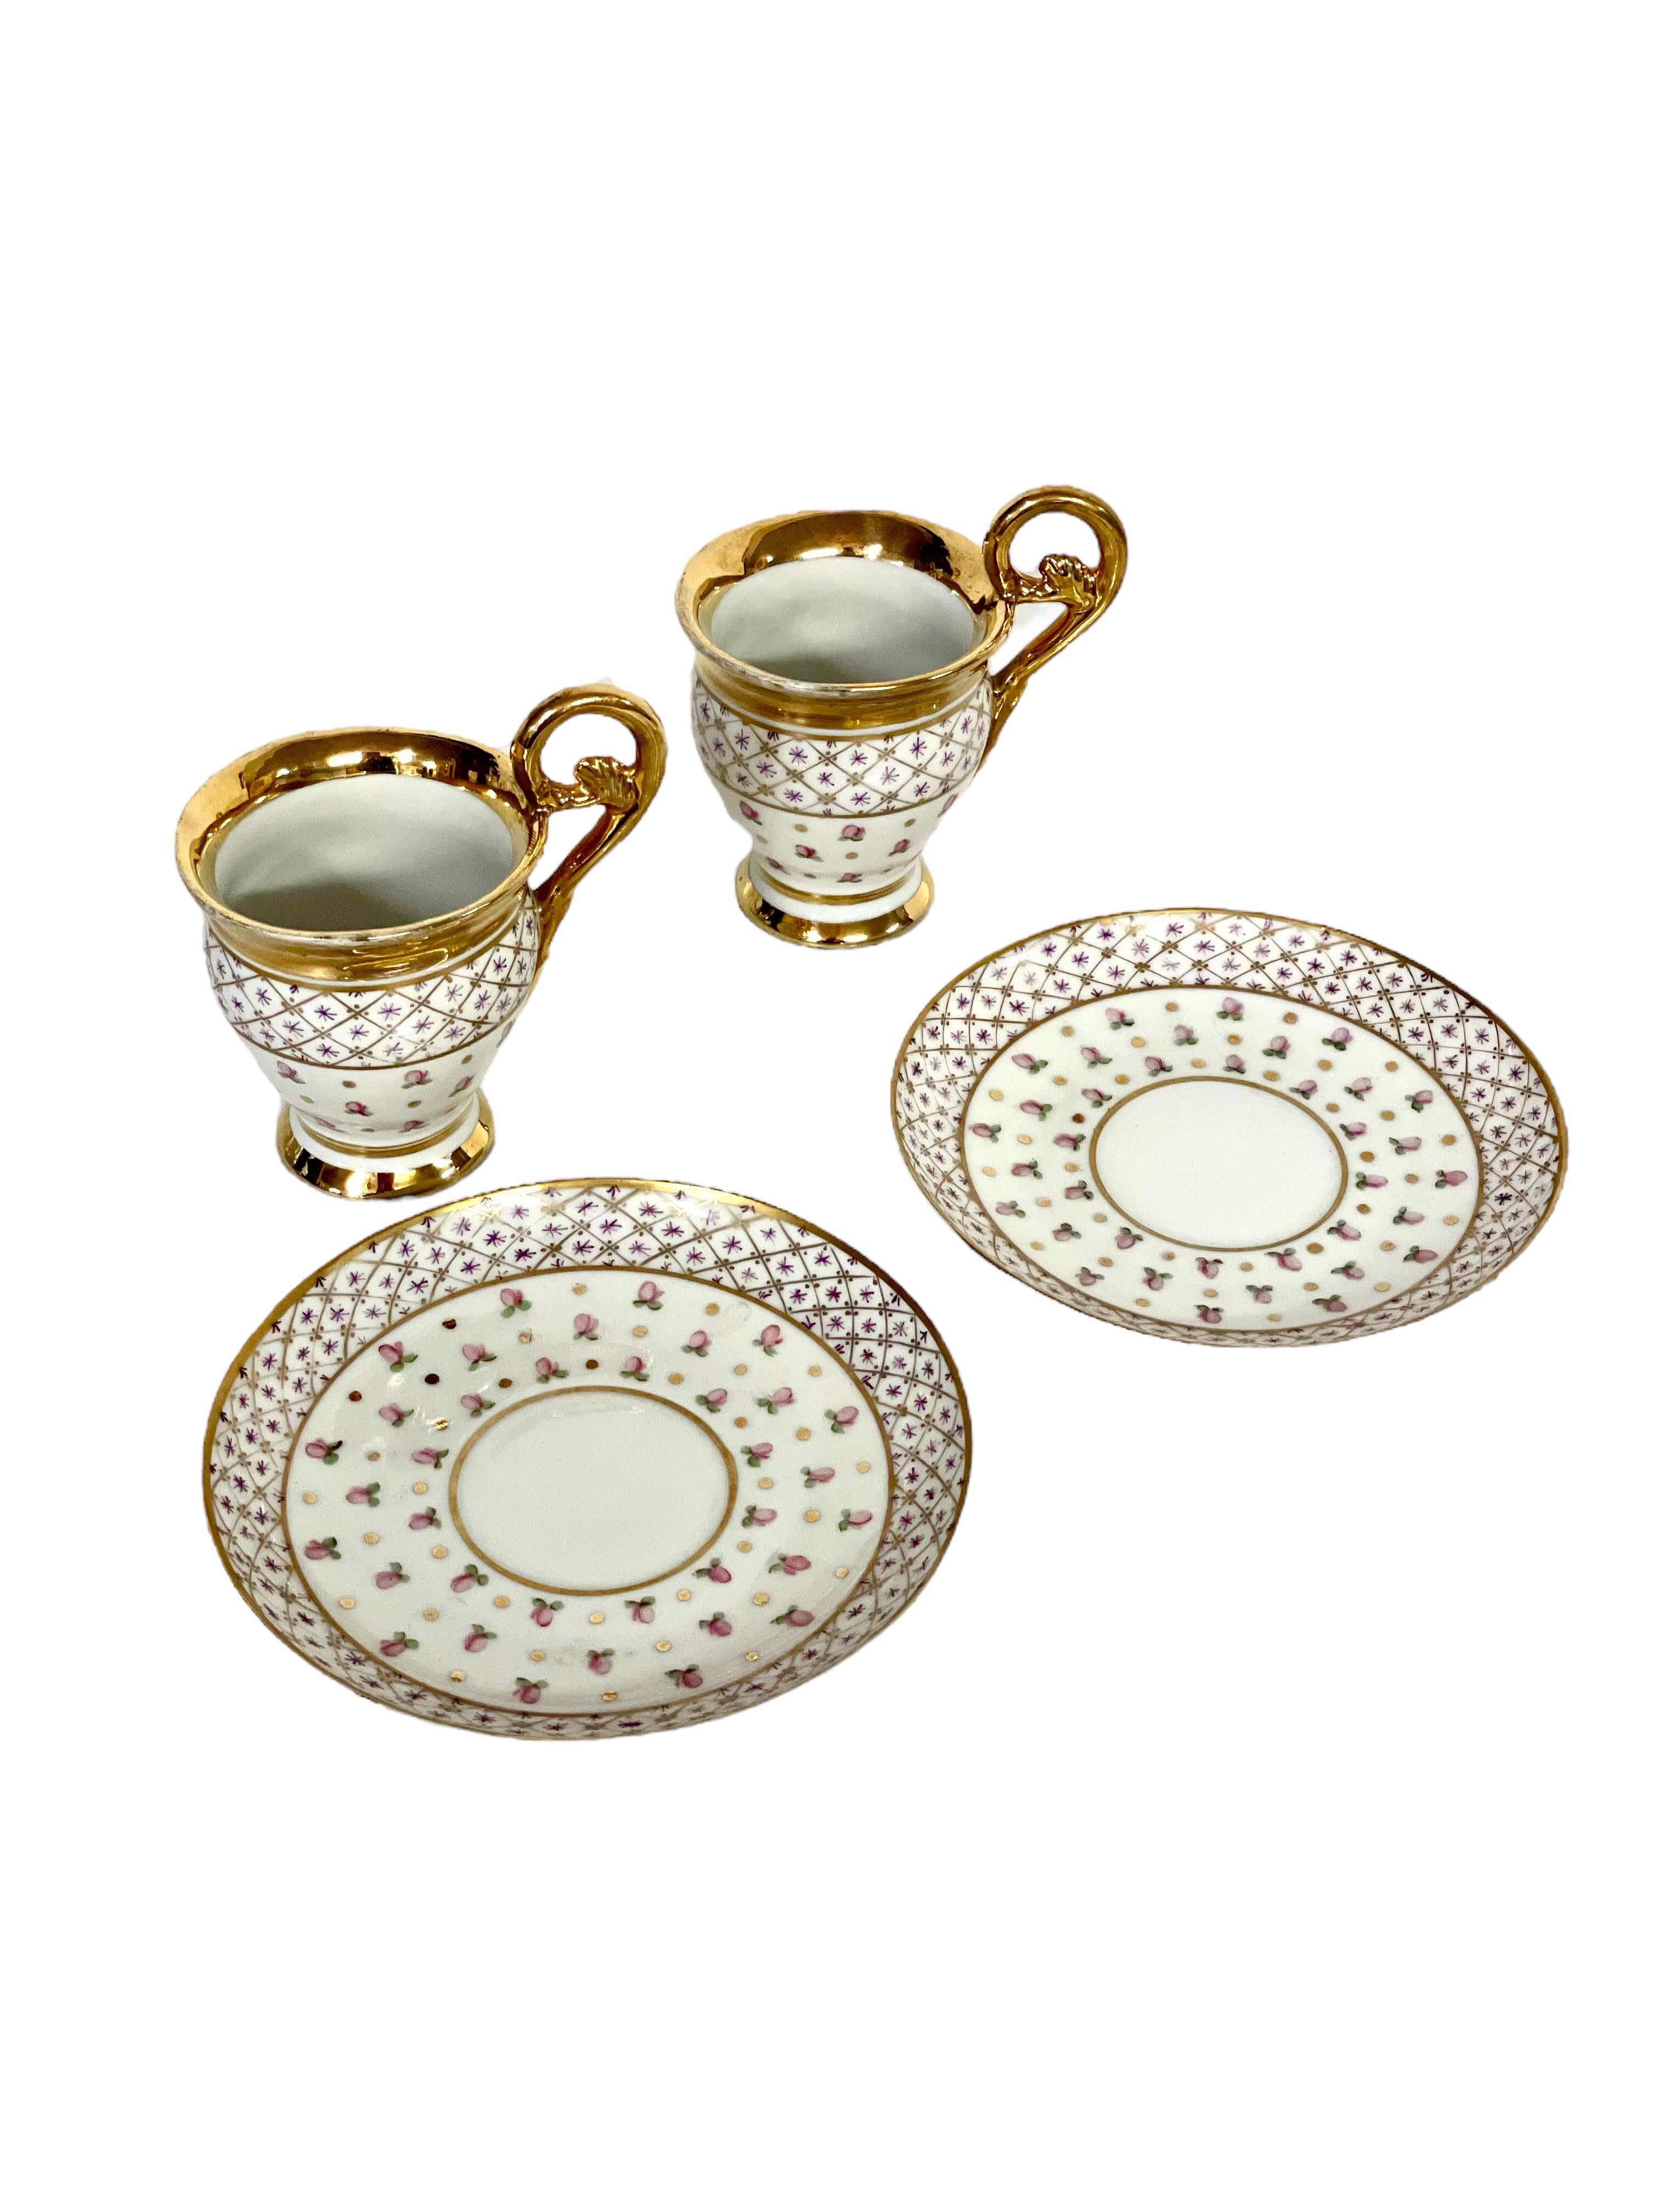 Louis XVI Antique Pair of Paris Porcelain Gilded Coffee Cups and Saucers For Sale